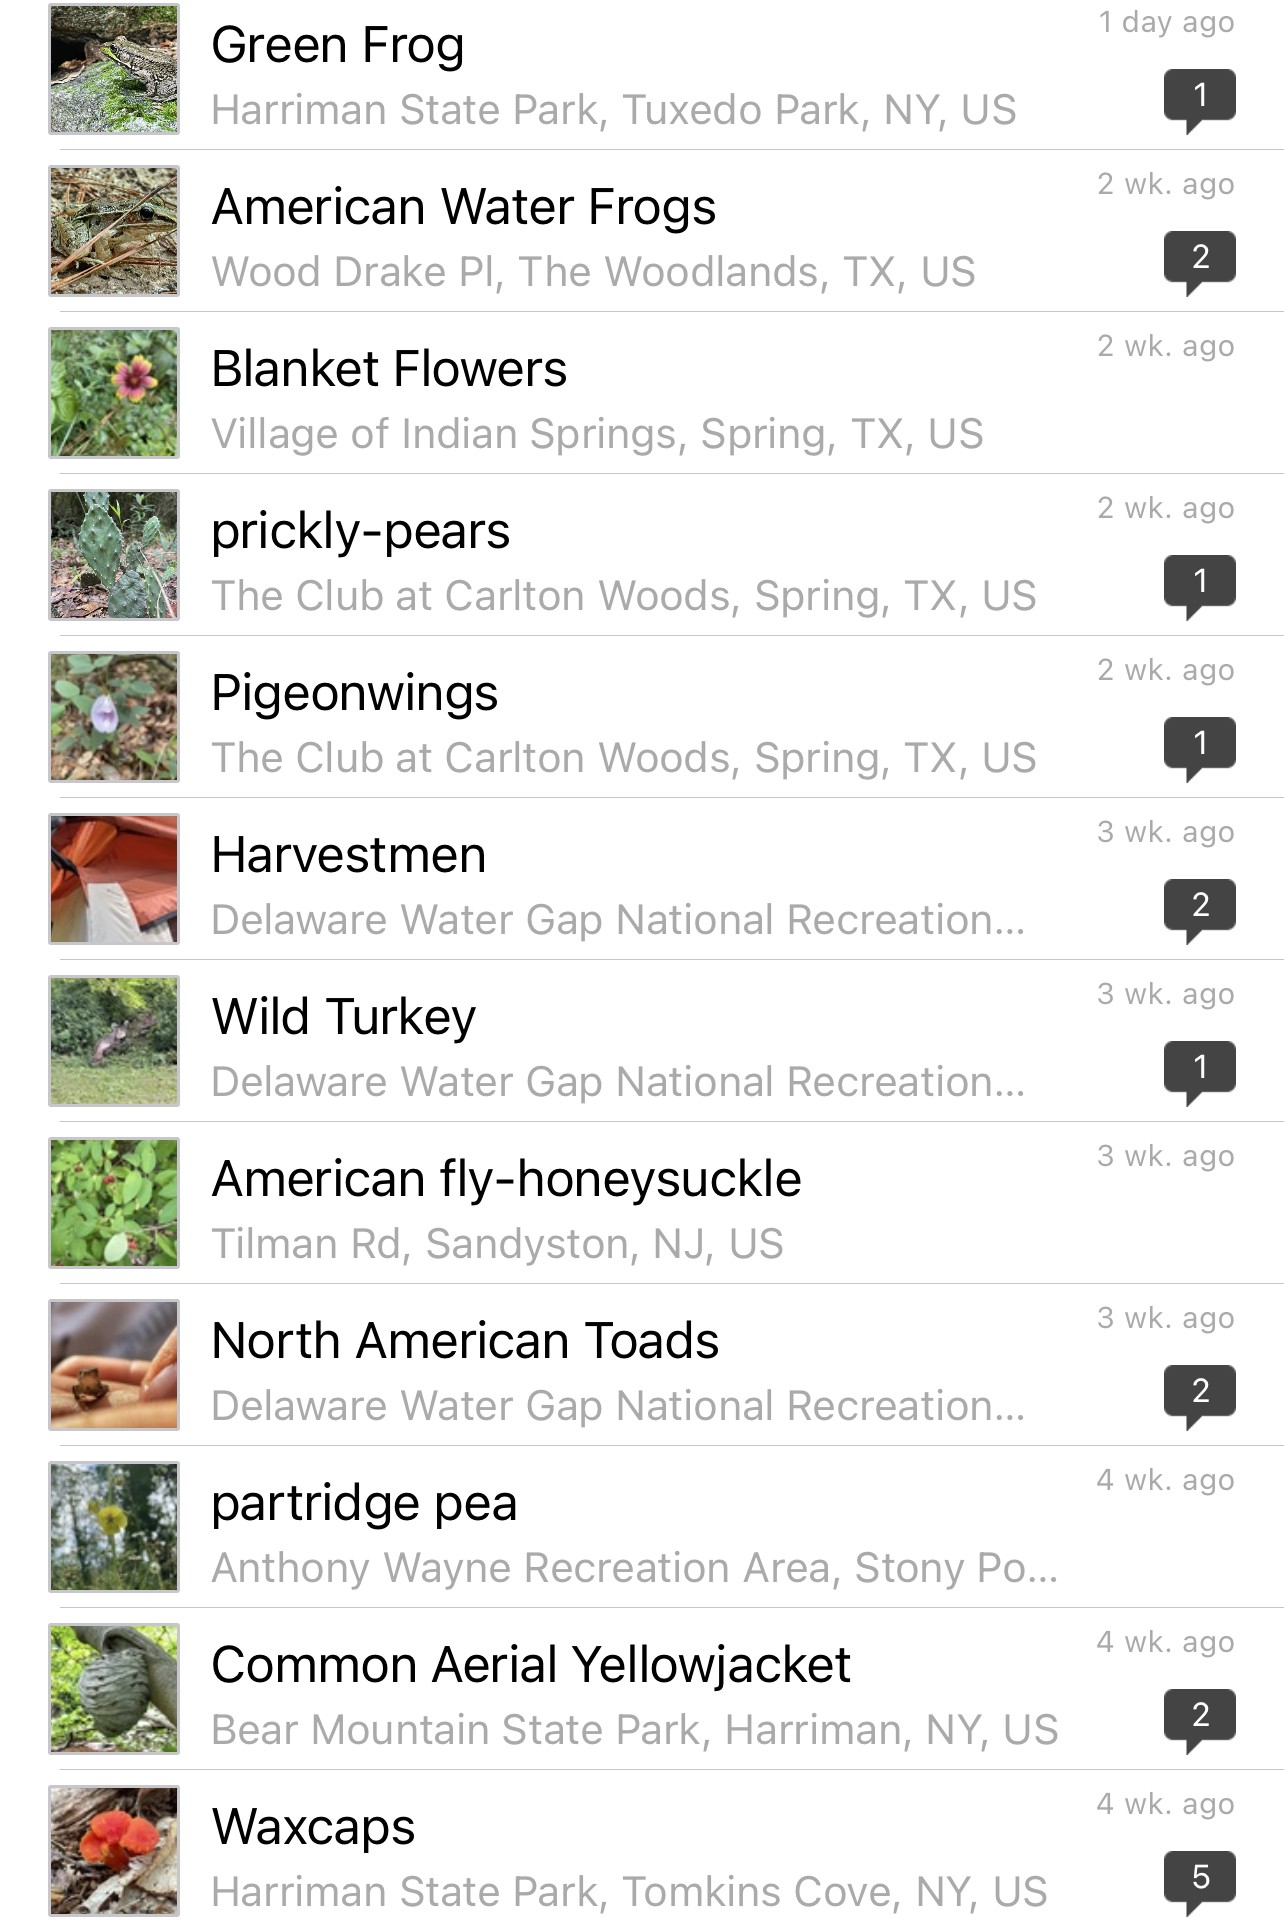 iNaturalist - one of the best hiking apps for learning 